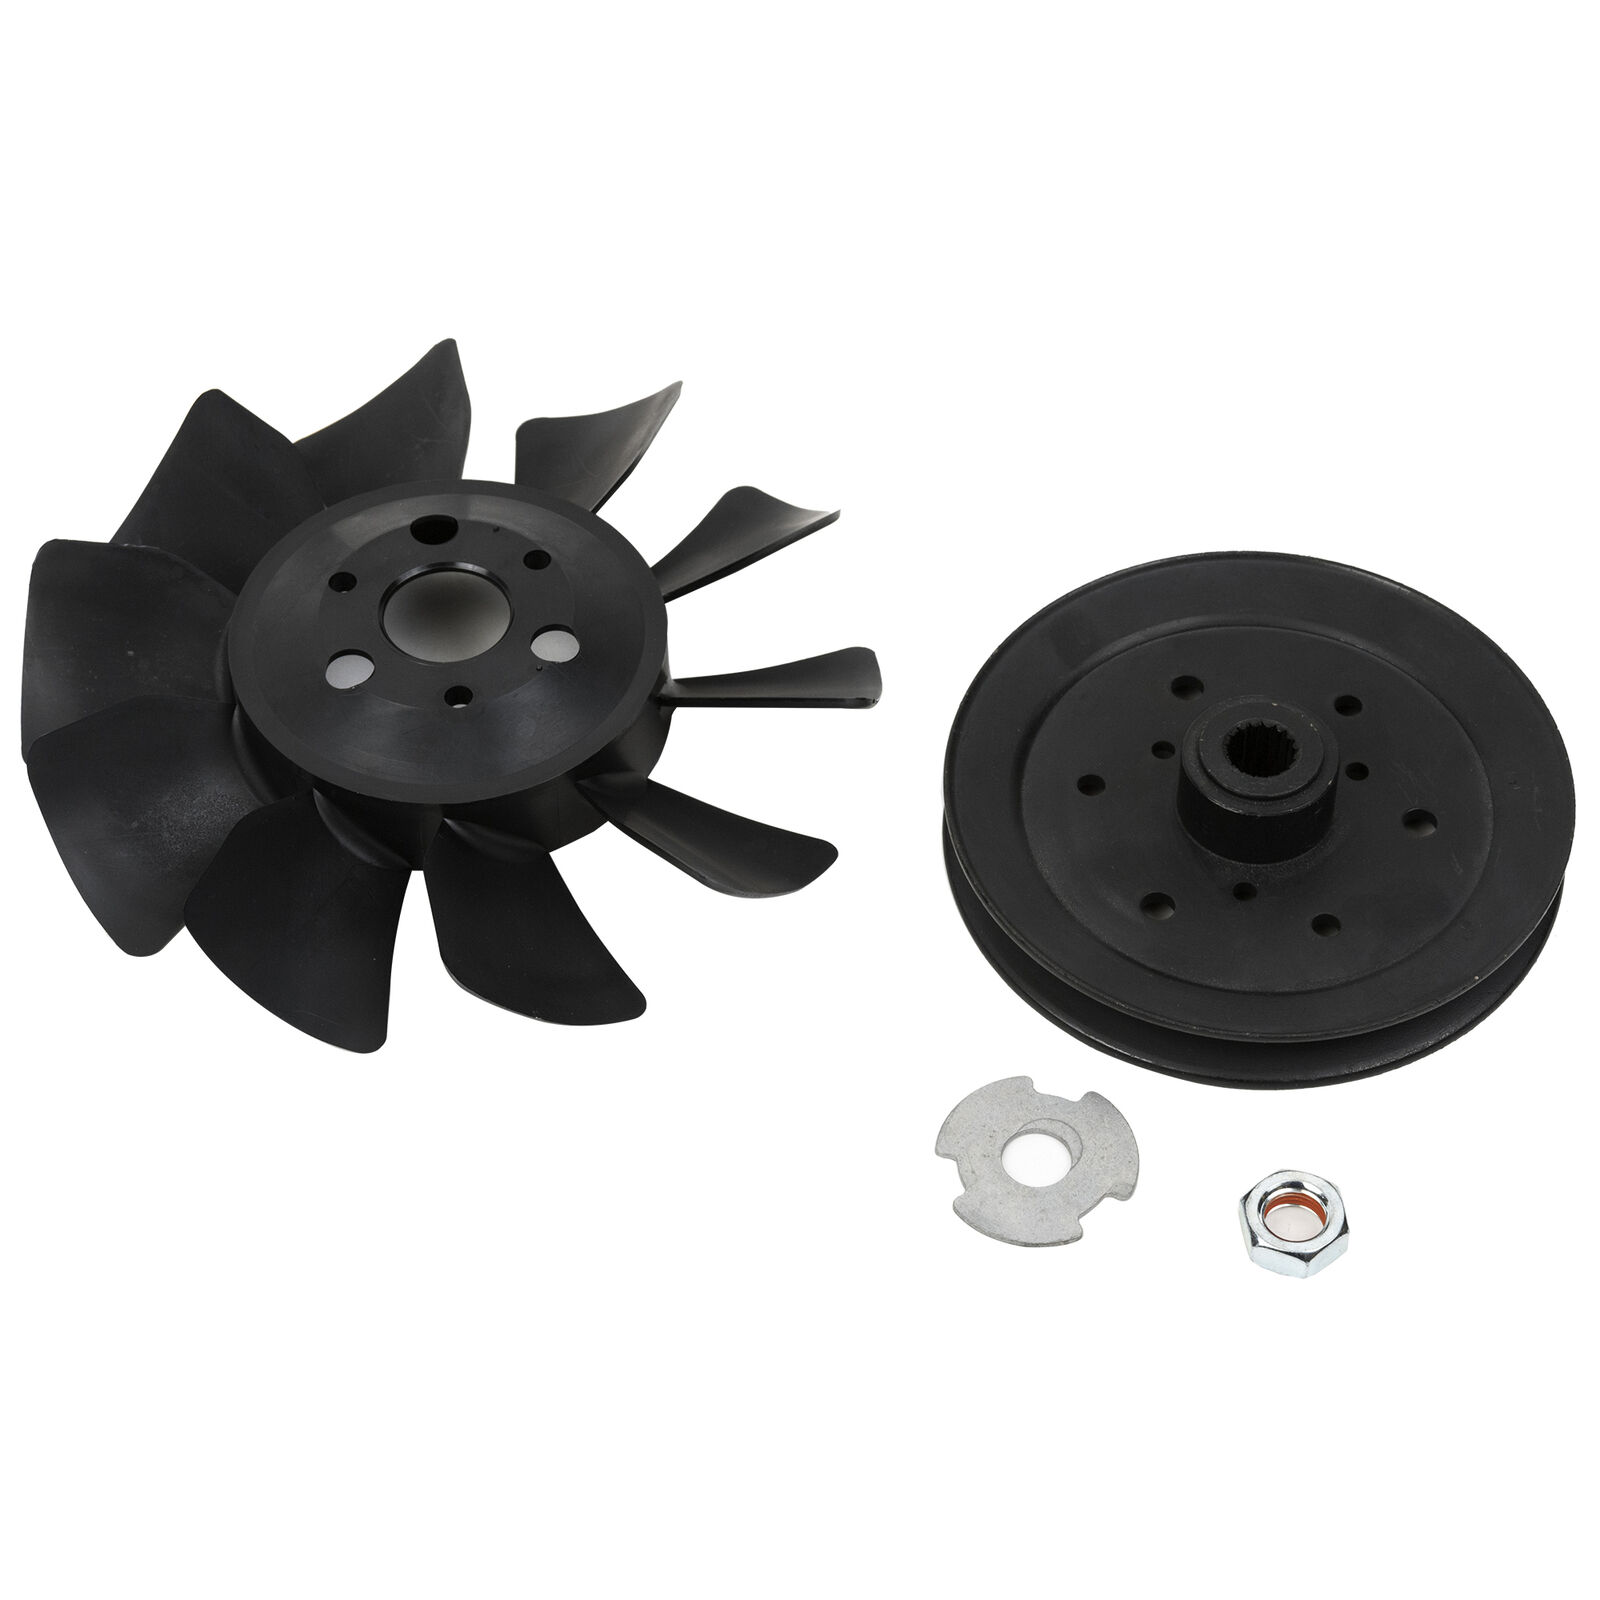 Genuine Exmark FAN AND PULLEY KIT Part# 121-3247